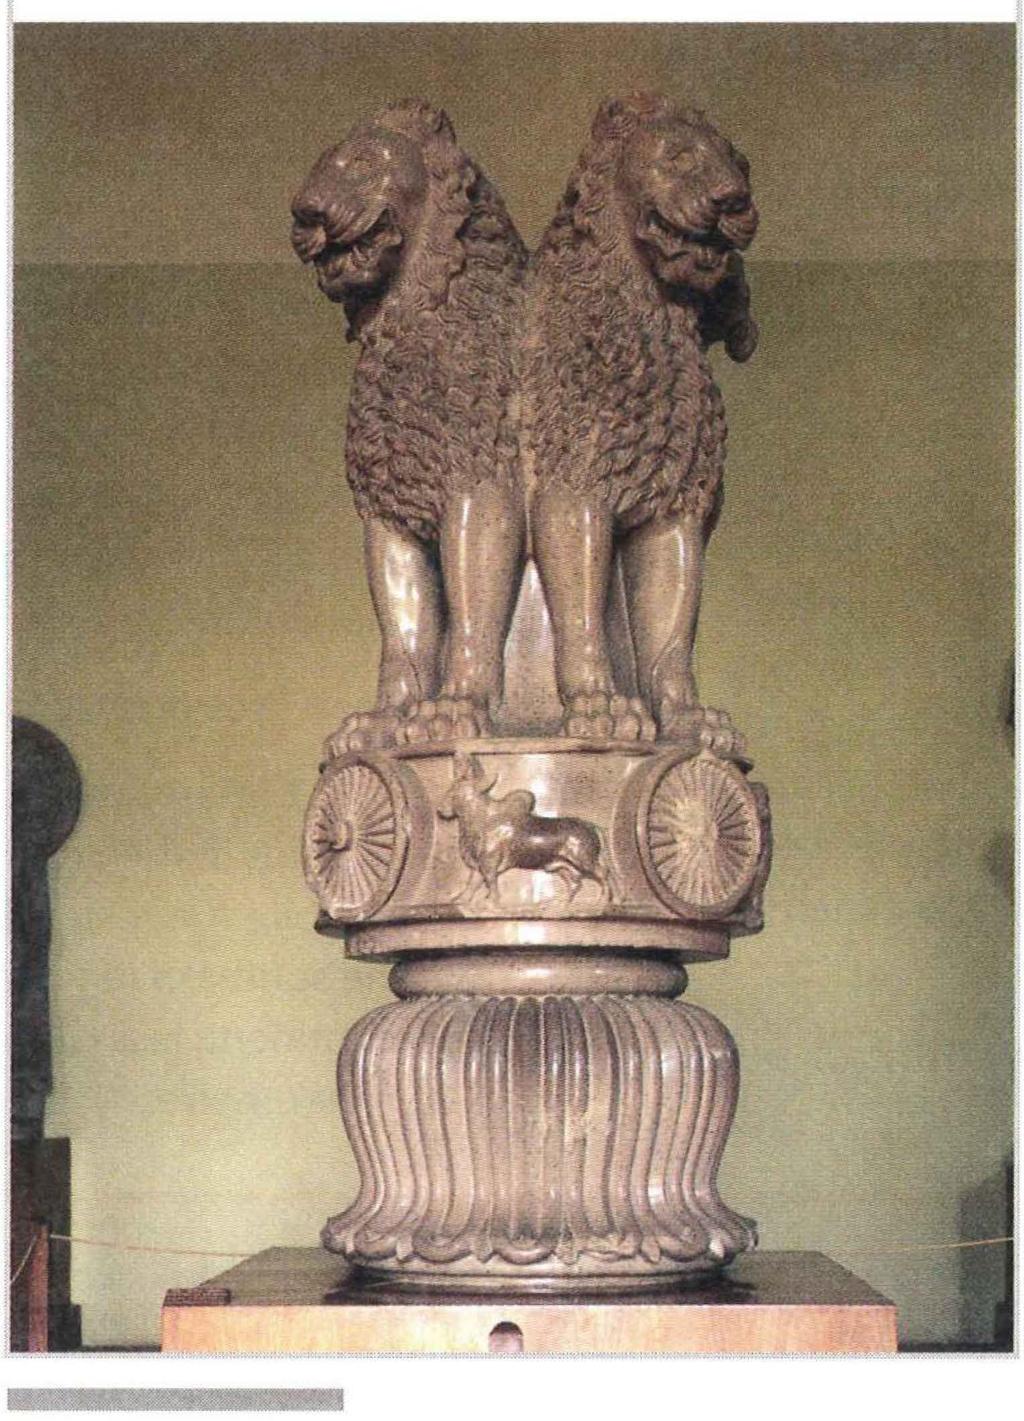 2 Two of the four lions that originally sat atop the Ashoka column at Sarnath, in present-day Uttar Pradesh, India (this view of the sculpture obscures the other two lions).